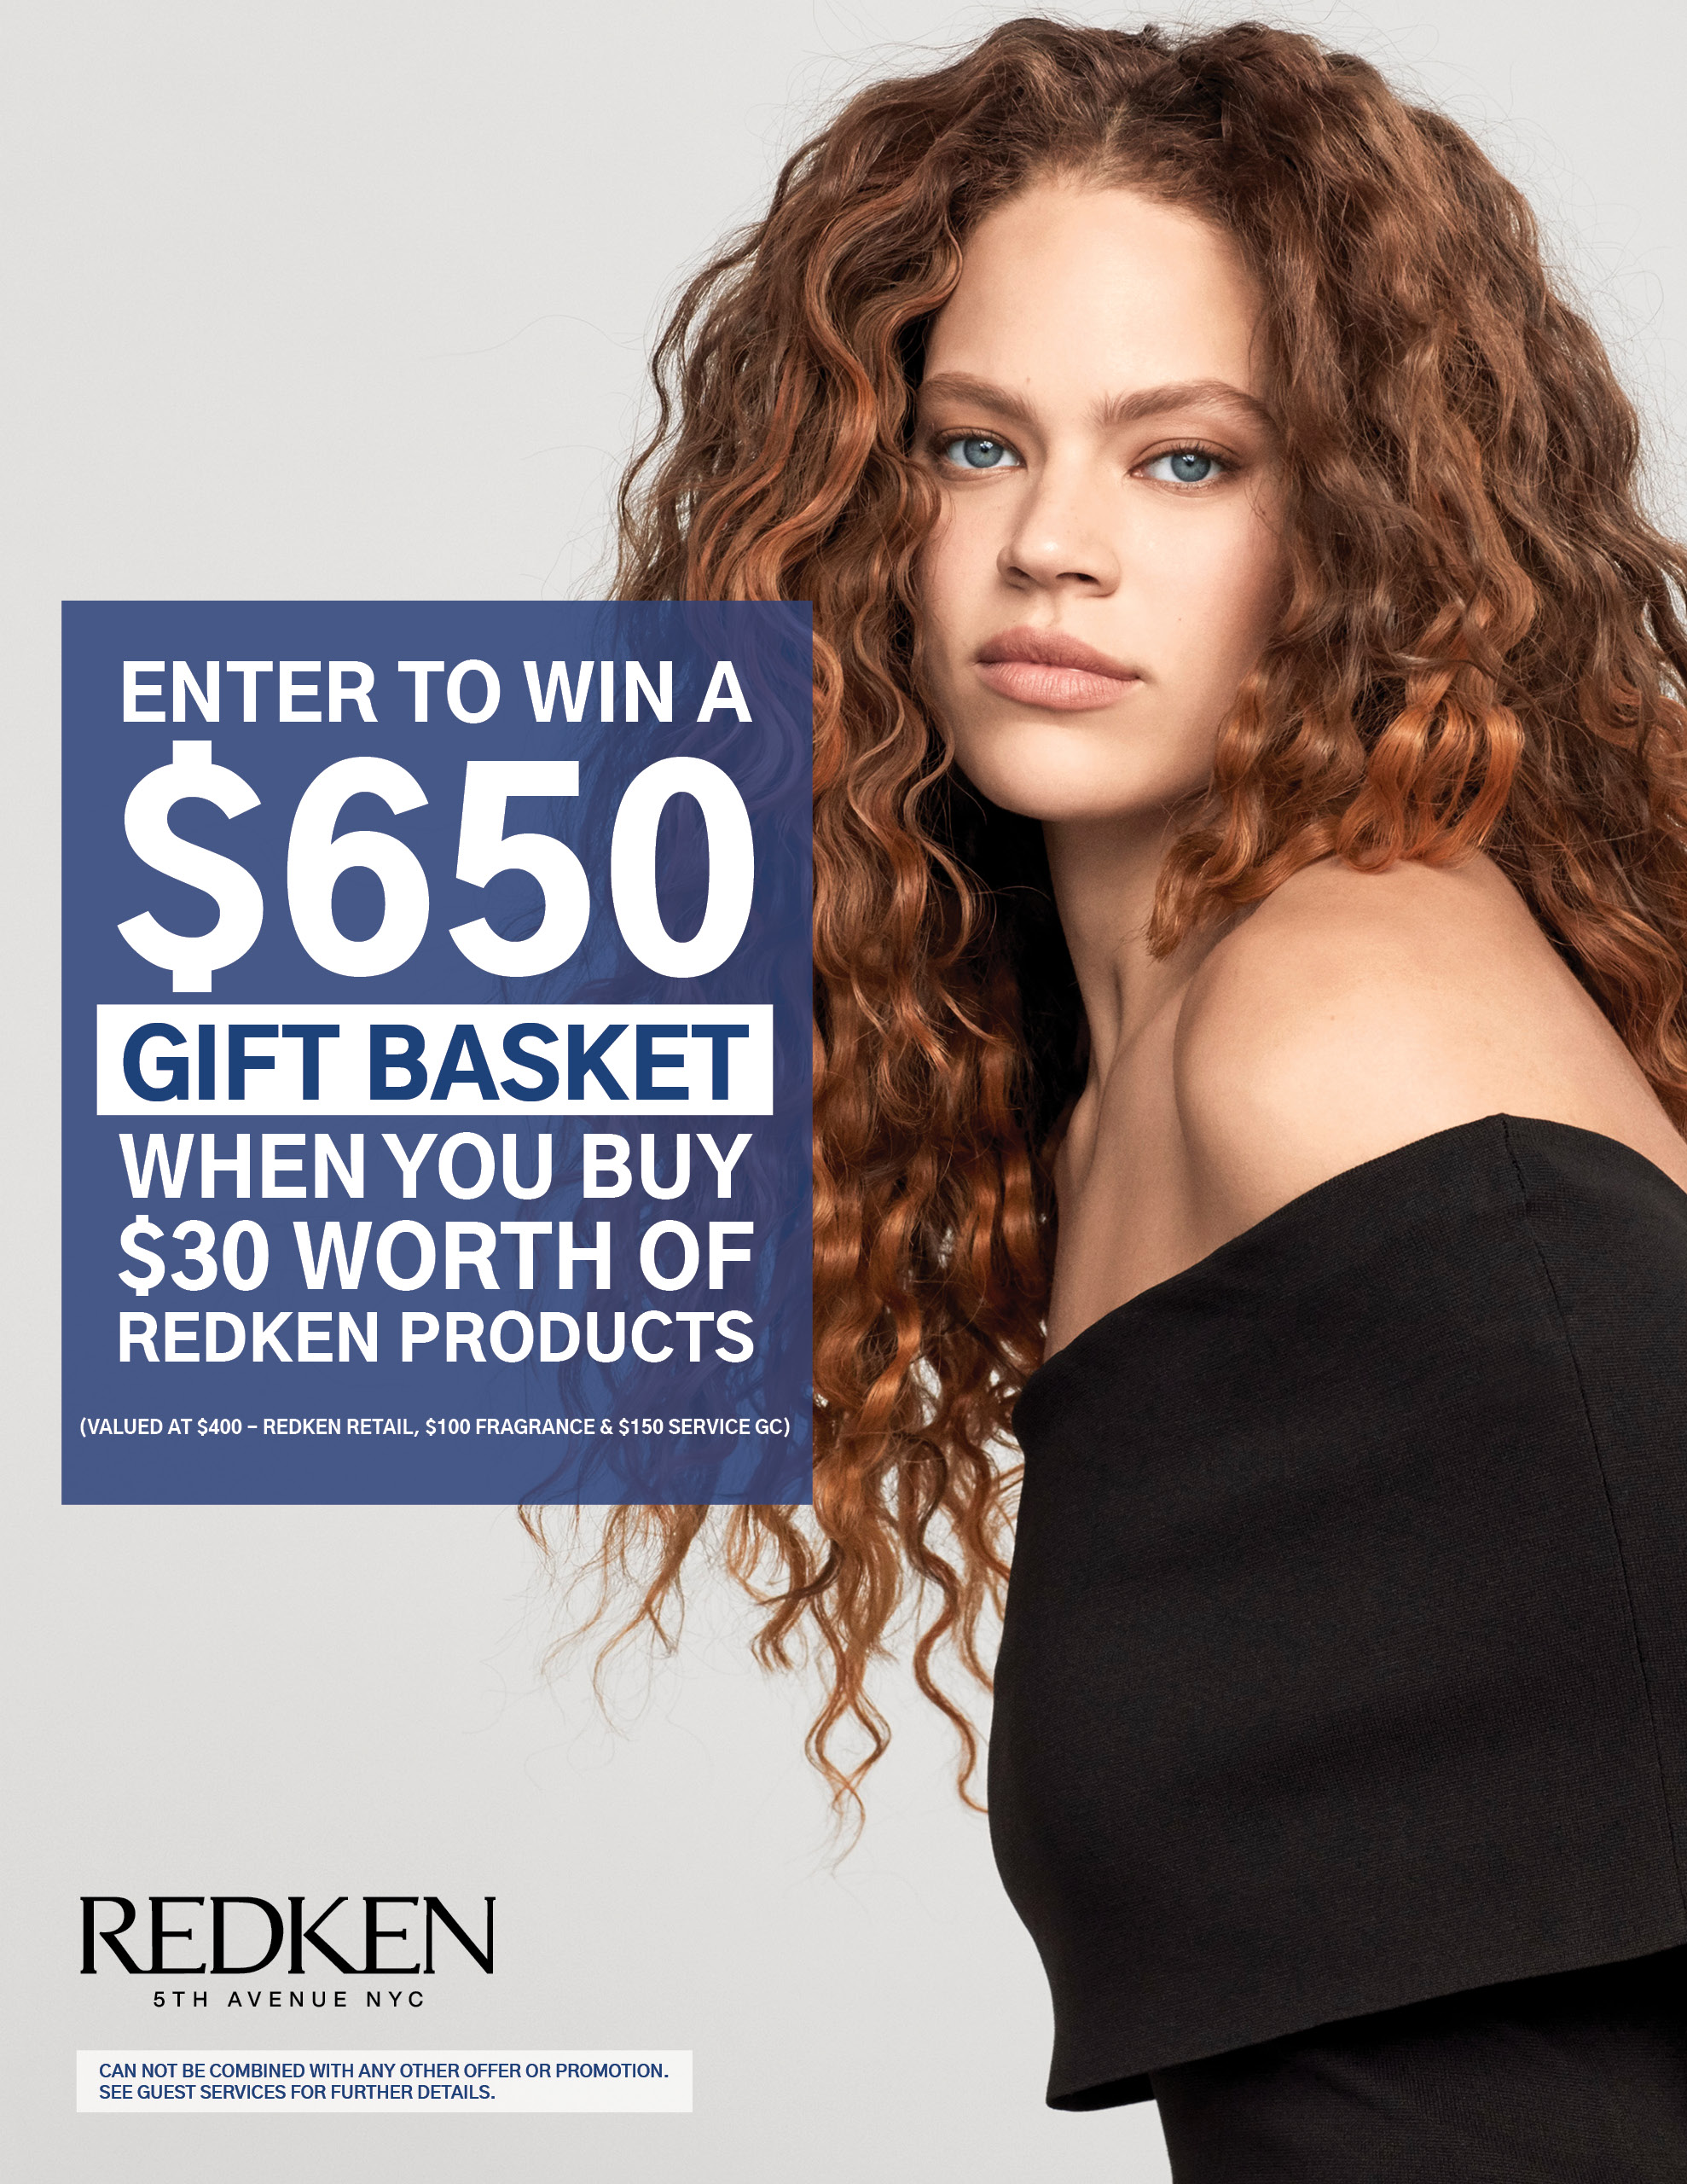 Spend $30 on Redken products and be entered to win a $650 Gift Basket!